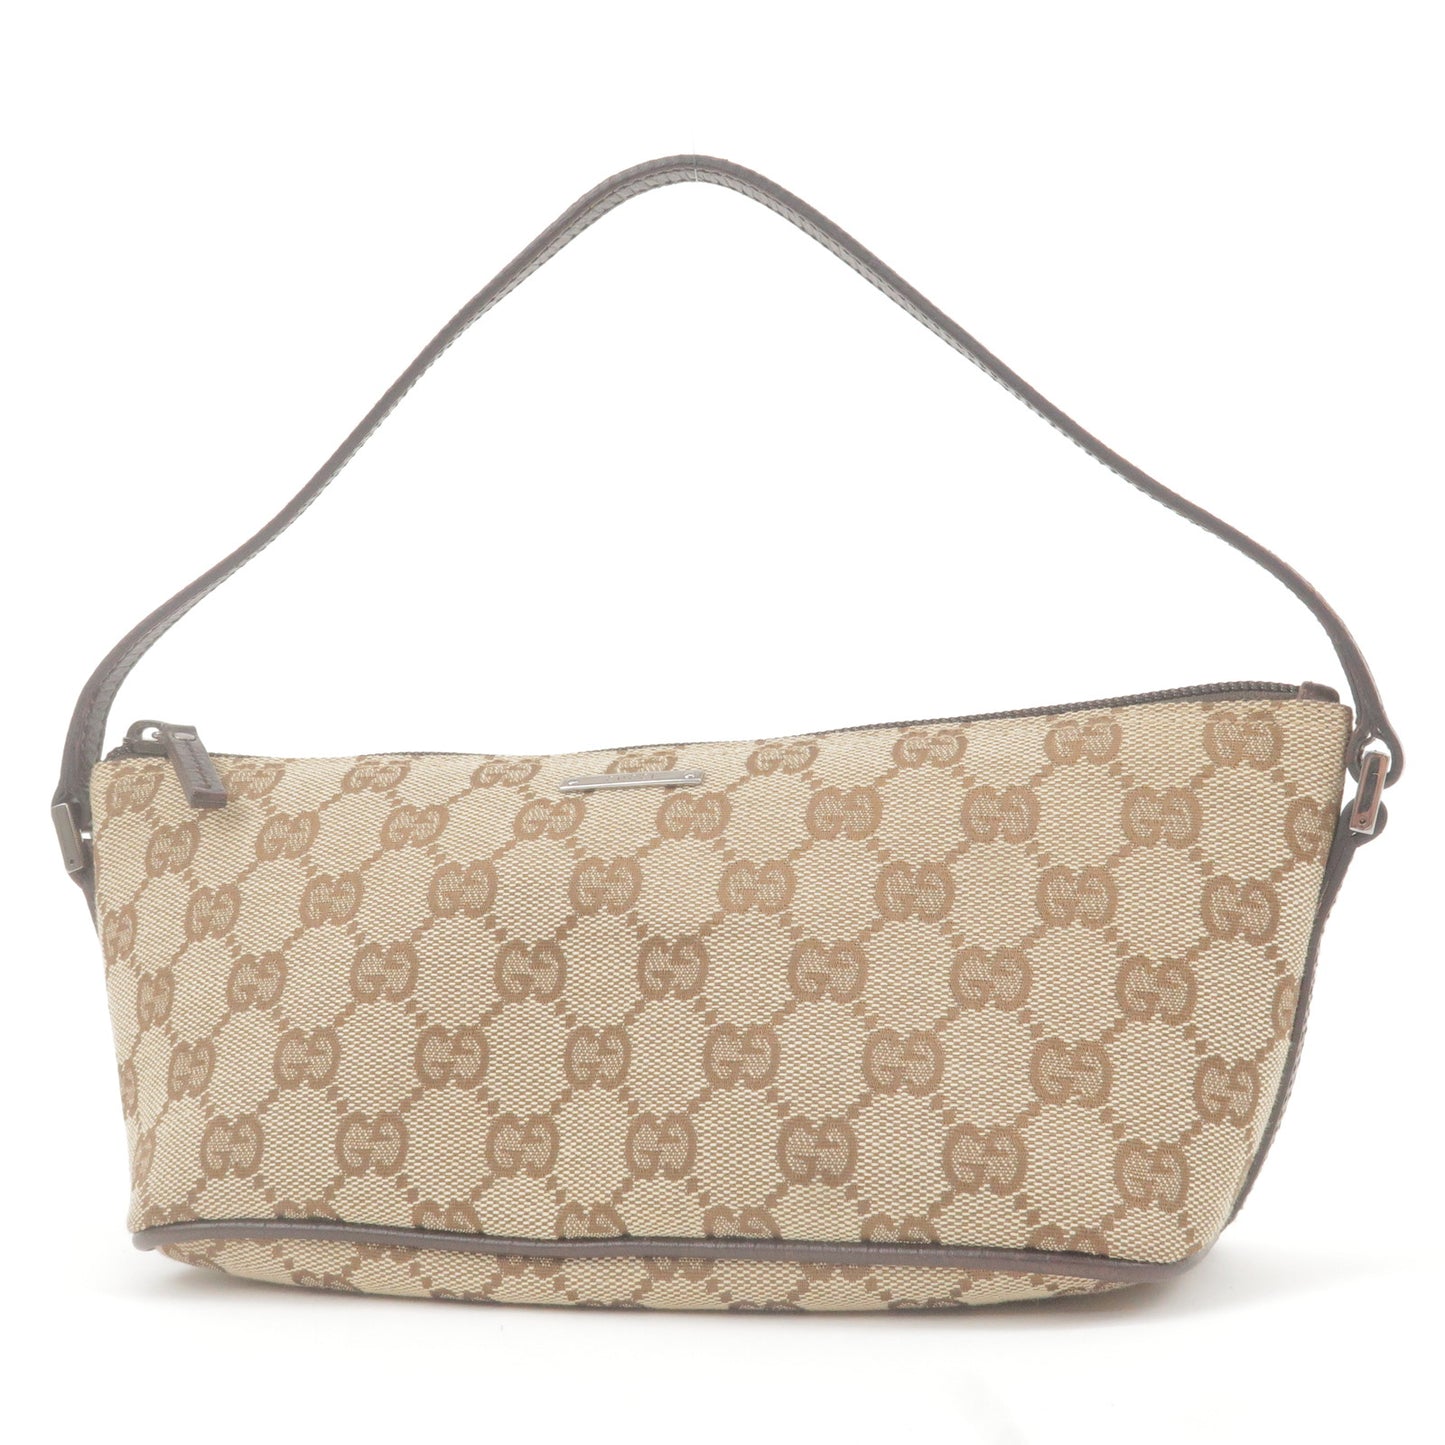 GUCCI-Boat-Bag-GG-Canvas-Leather-Hand-Bag-Beige-07198 – dct-ep_vintage  luxury Store